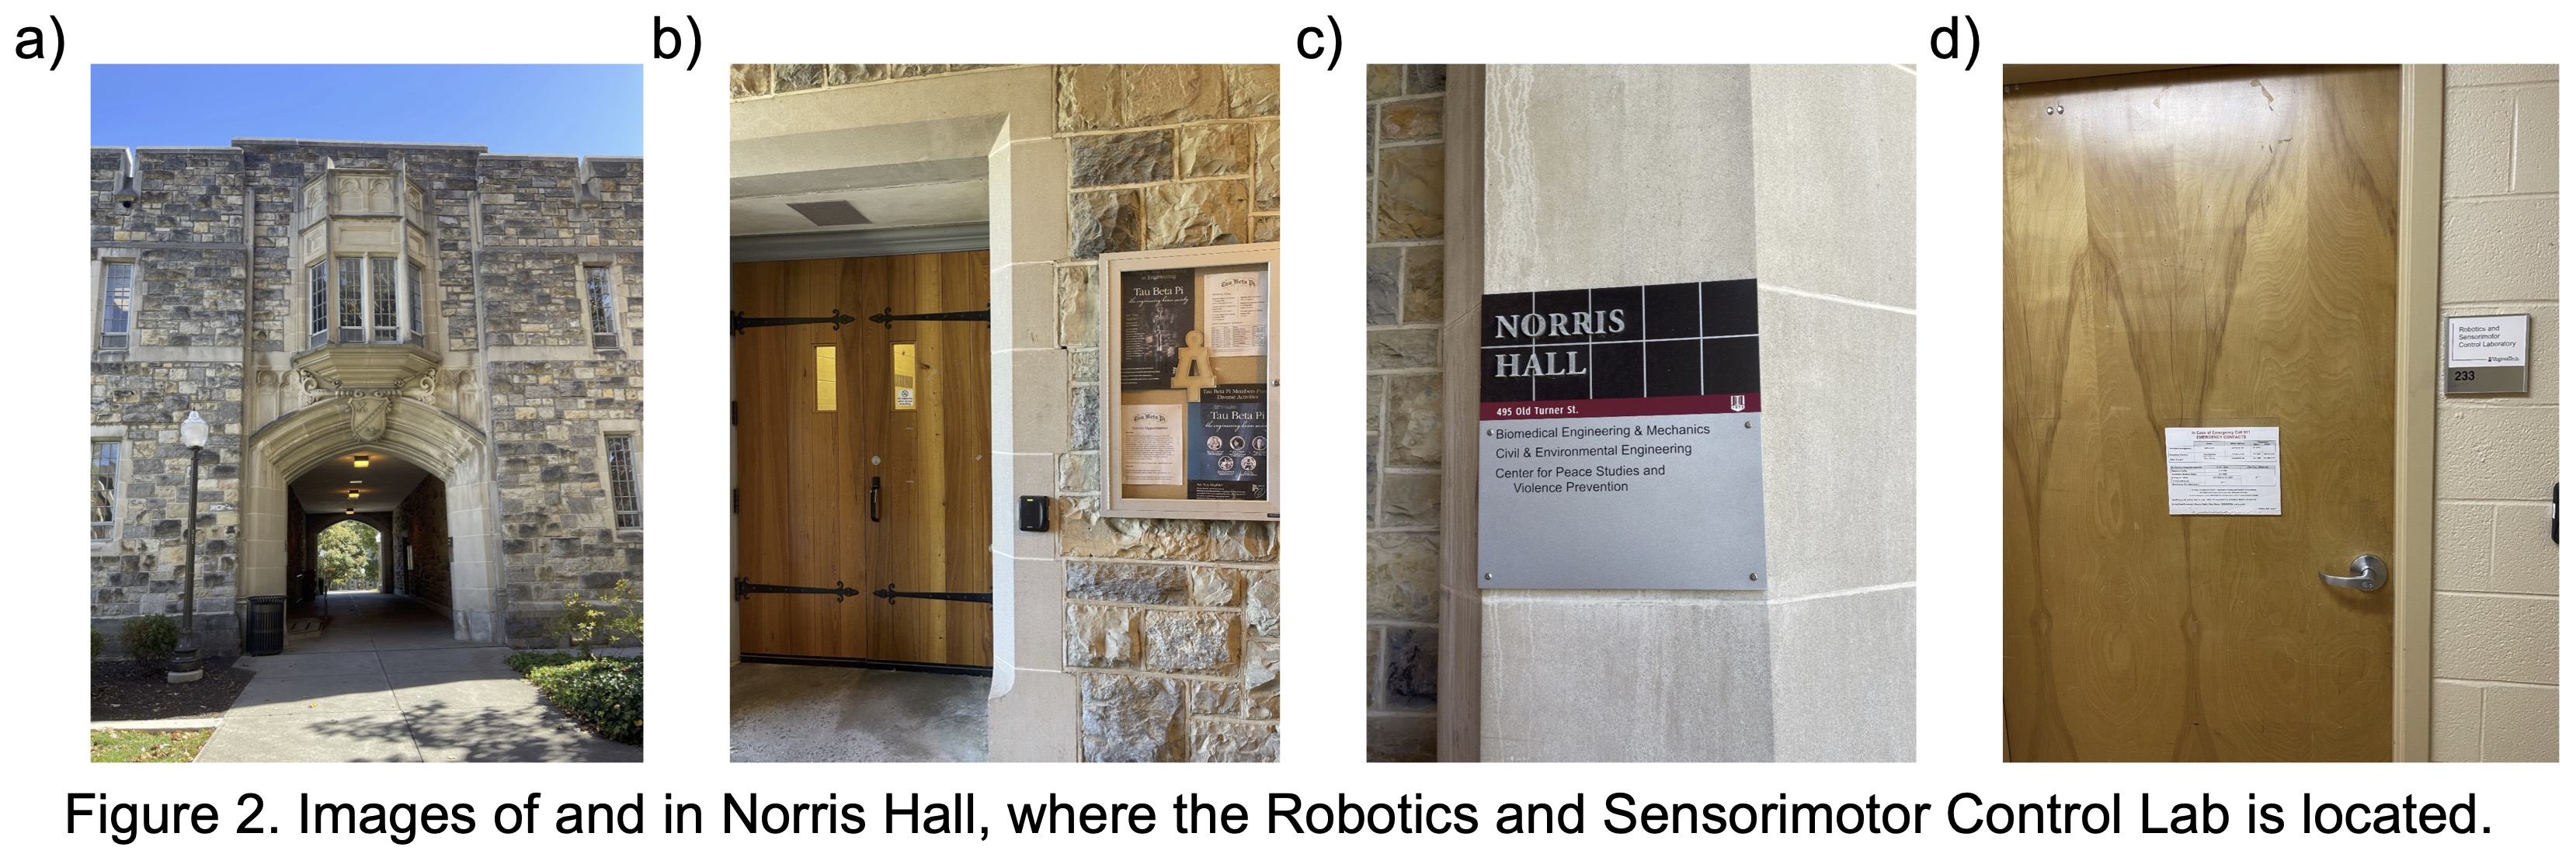 Norris Hall Images